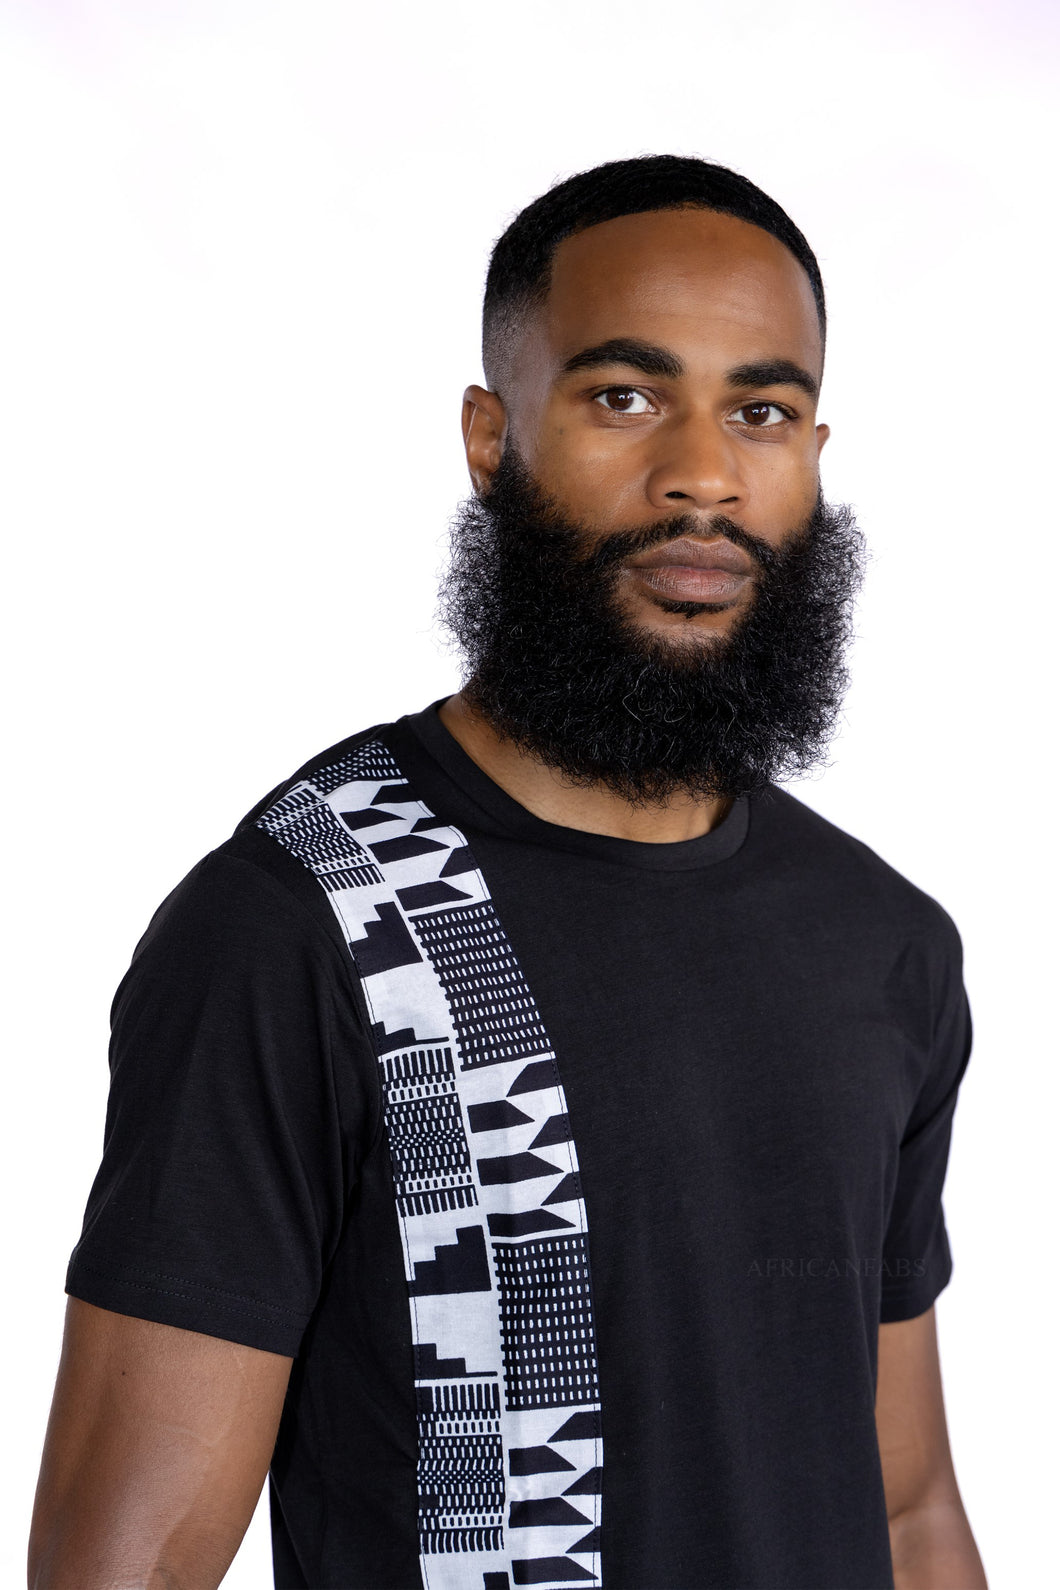 T-shirt with African print details -  Black / white kente band